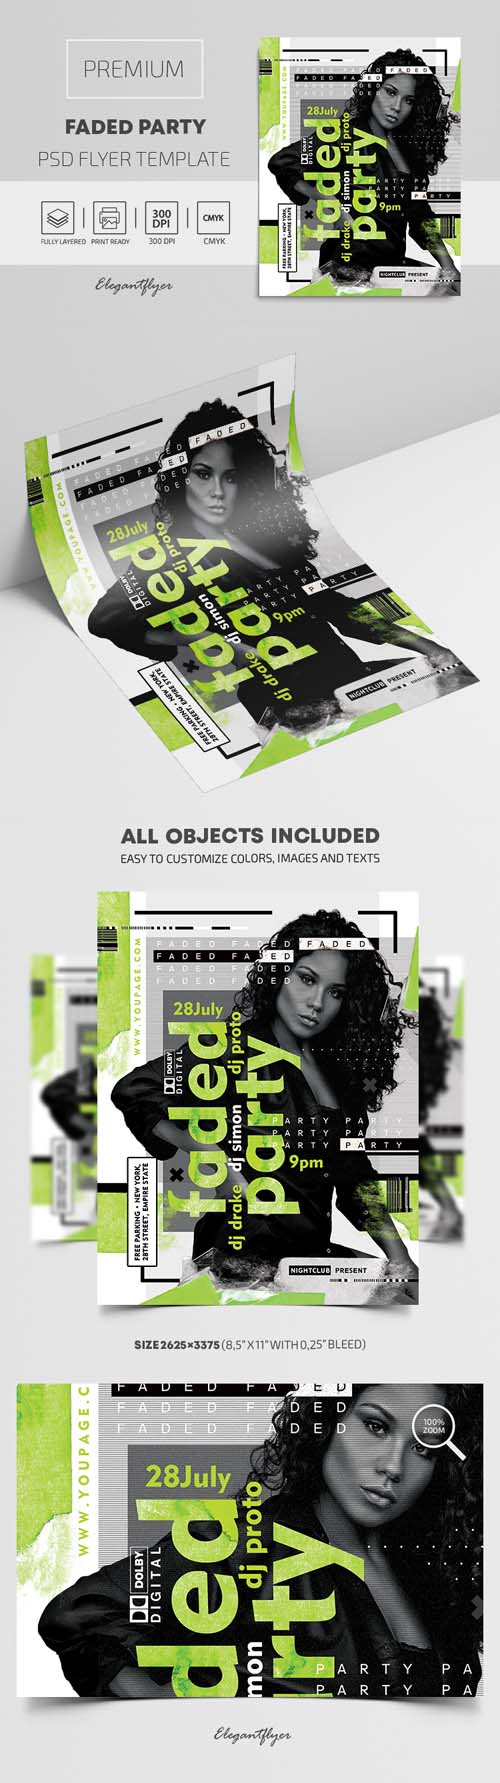 Faded Party Premium PSD Flyer Template